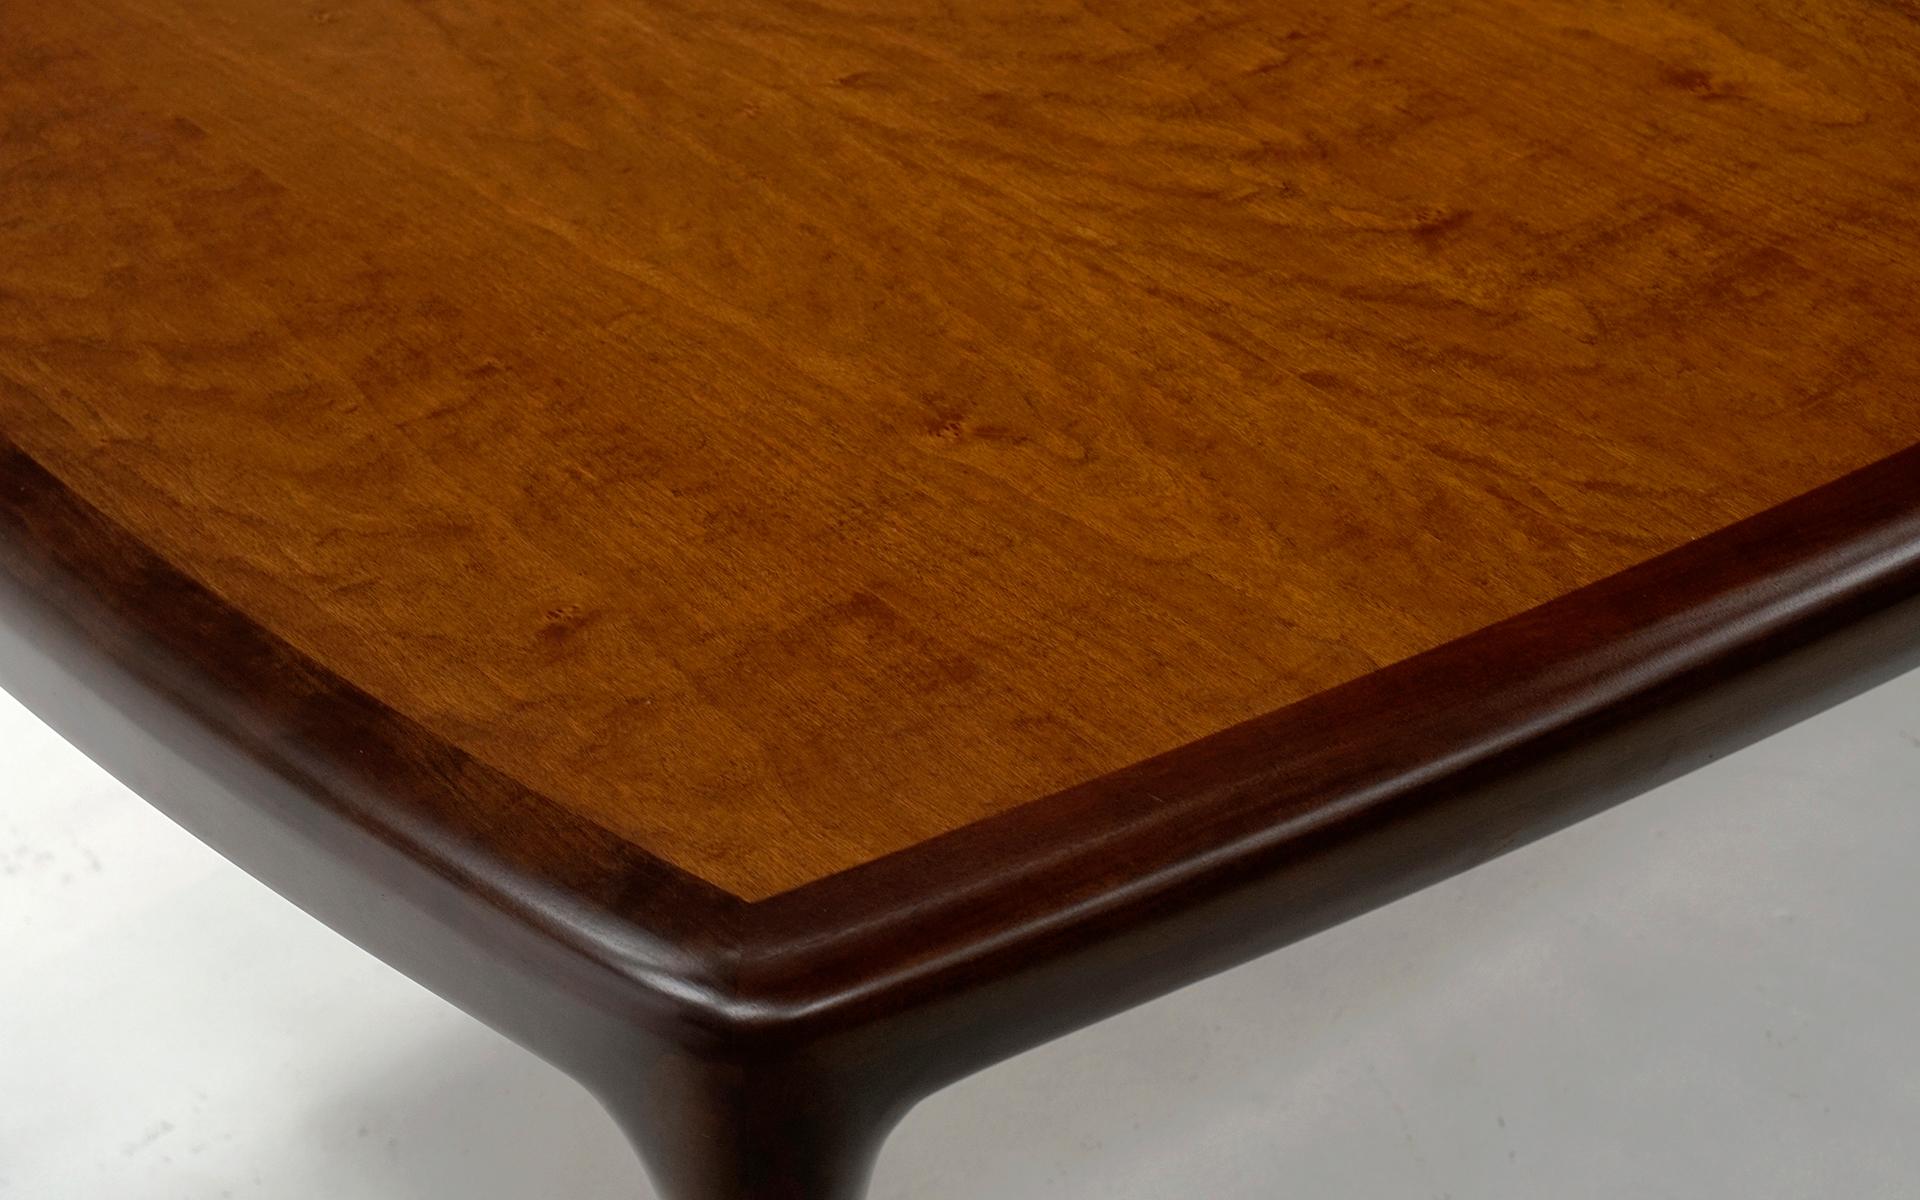 Mid-20th Century Dining Table in Cherry by Edward Wormley for Dunbar, Expertly Refinished